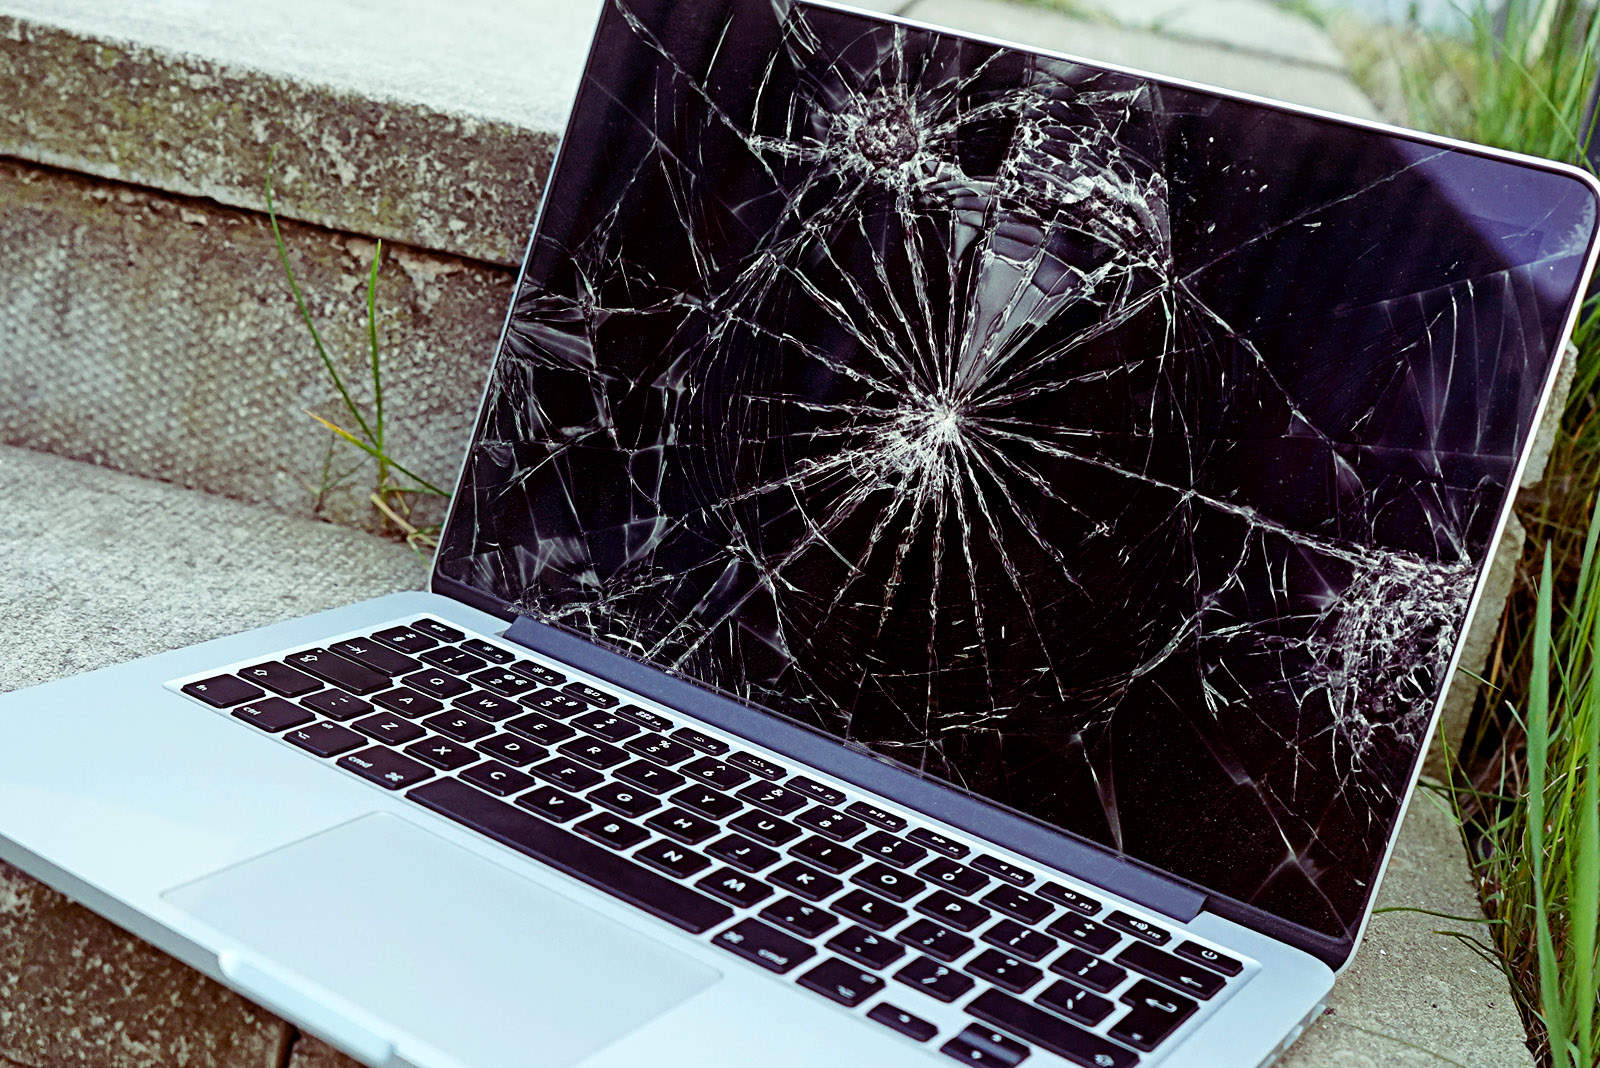 Sell your MacBook to us, even if it's busted.